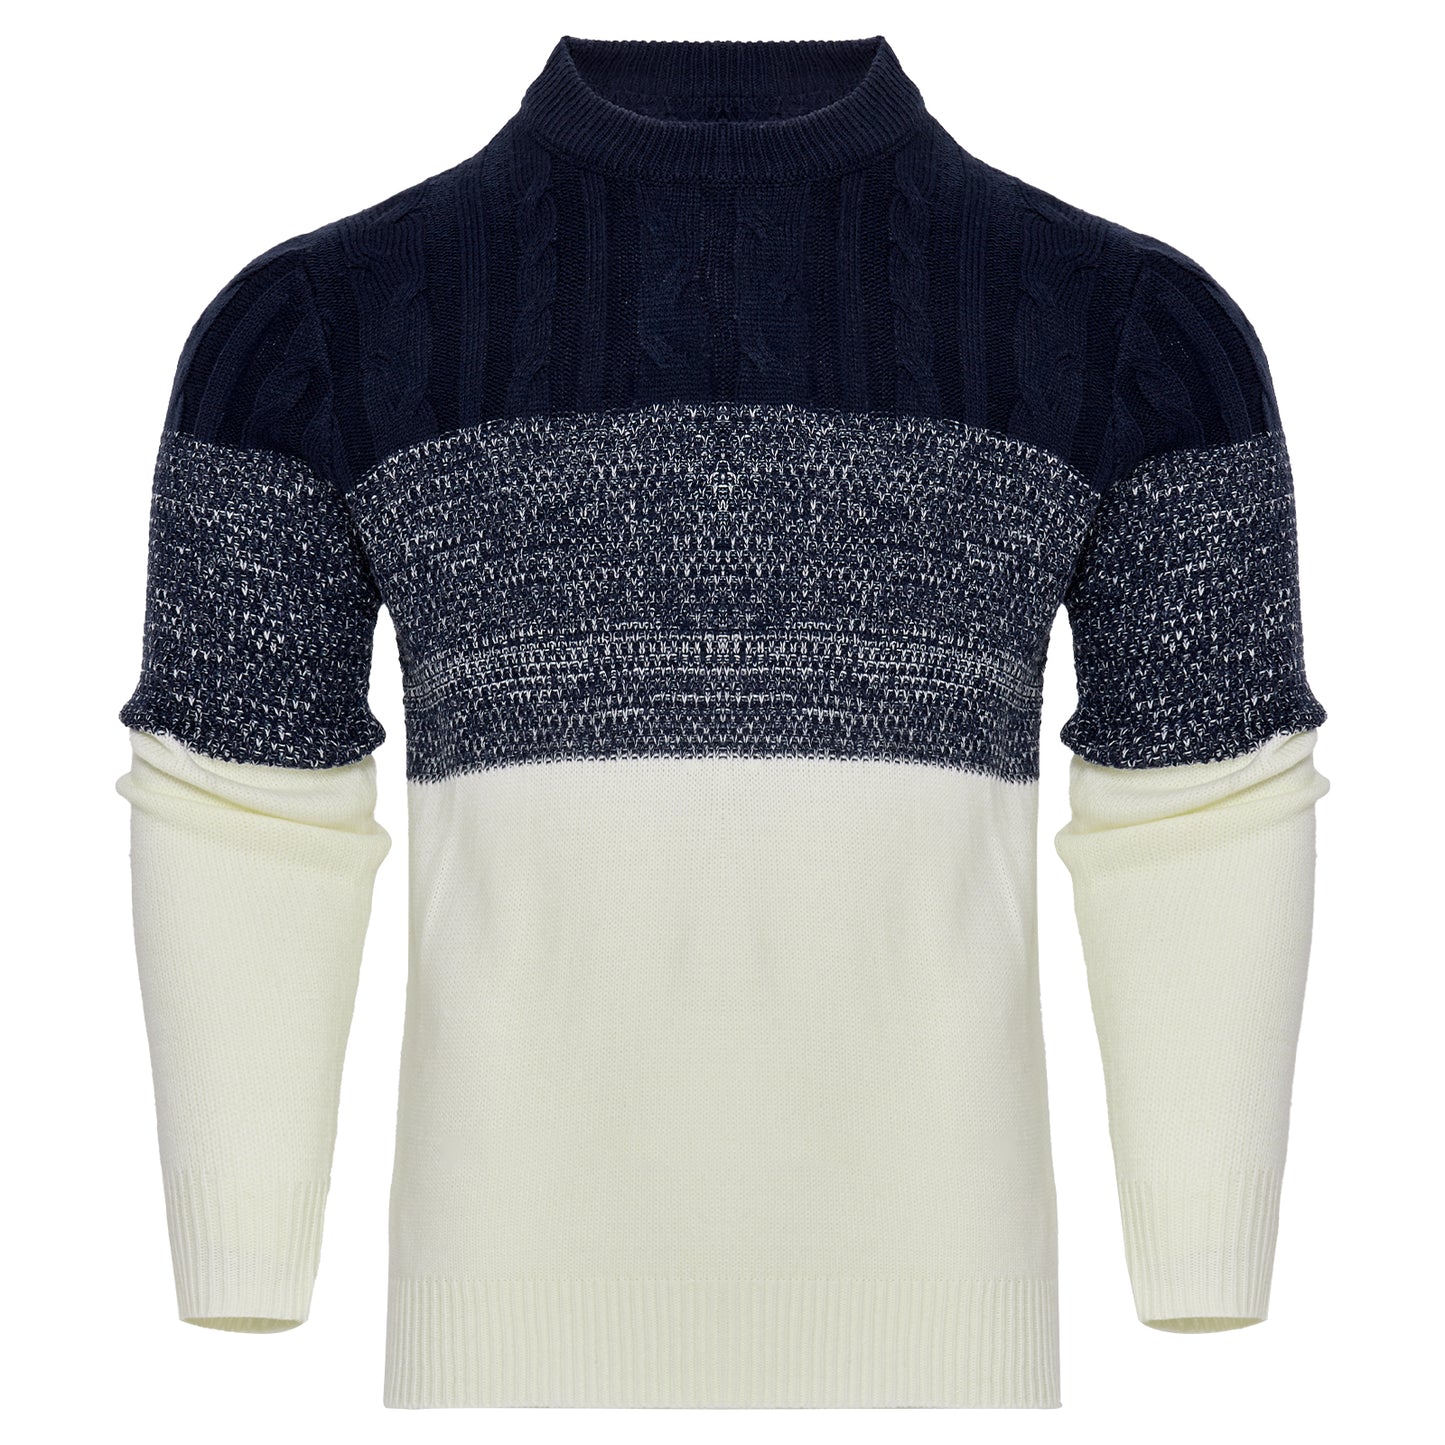 Men's Casual Color Block Long Sleeve Cable Knit Pullover Sweater